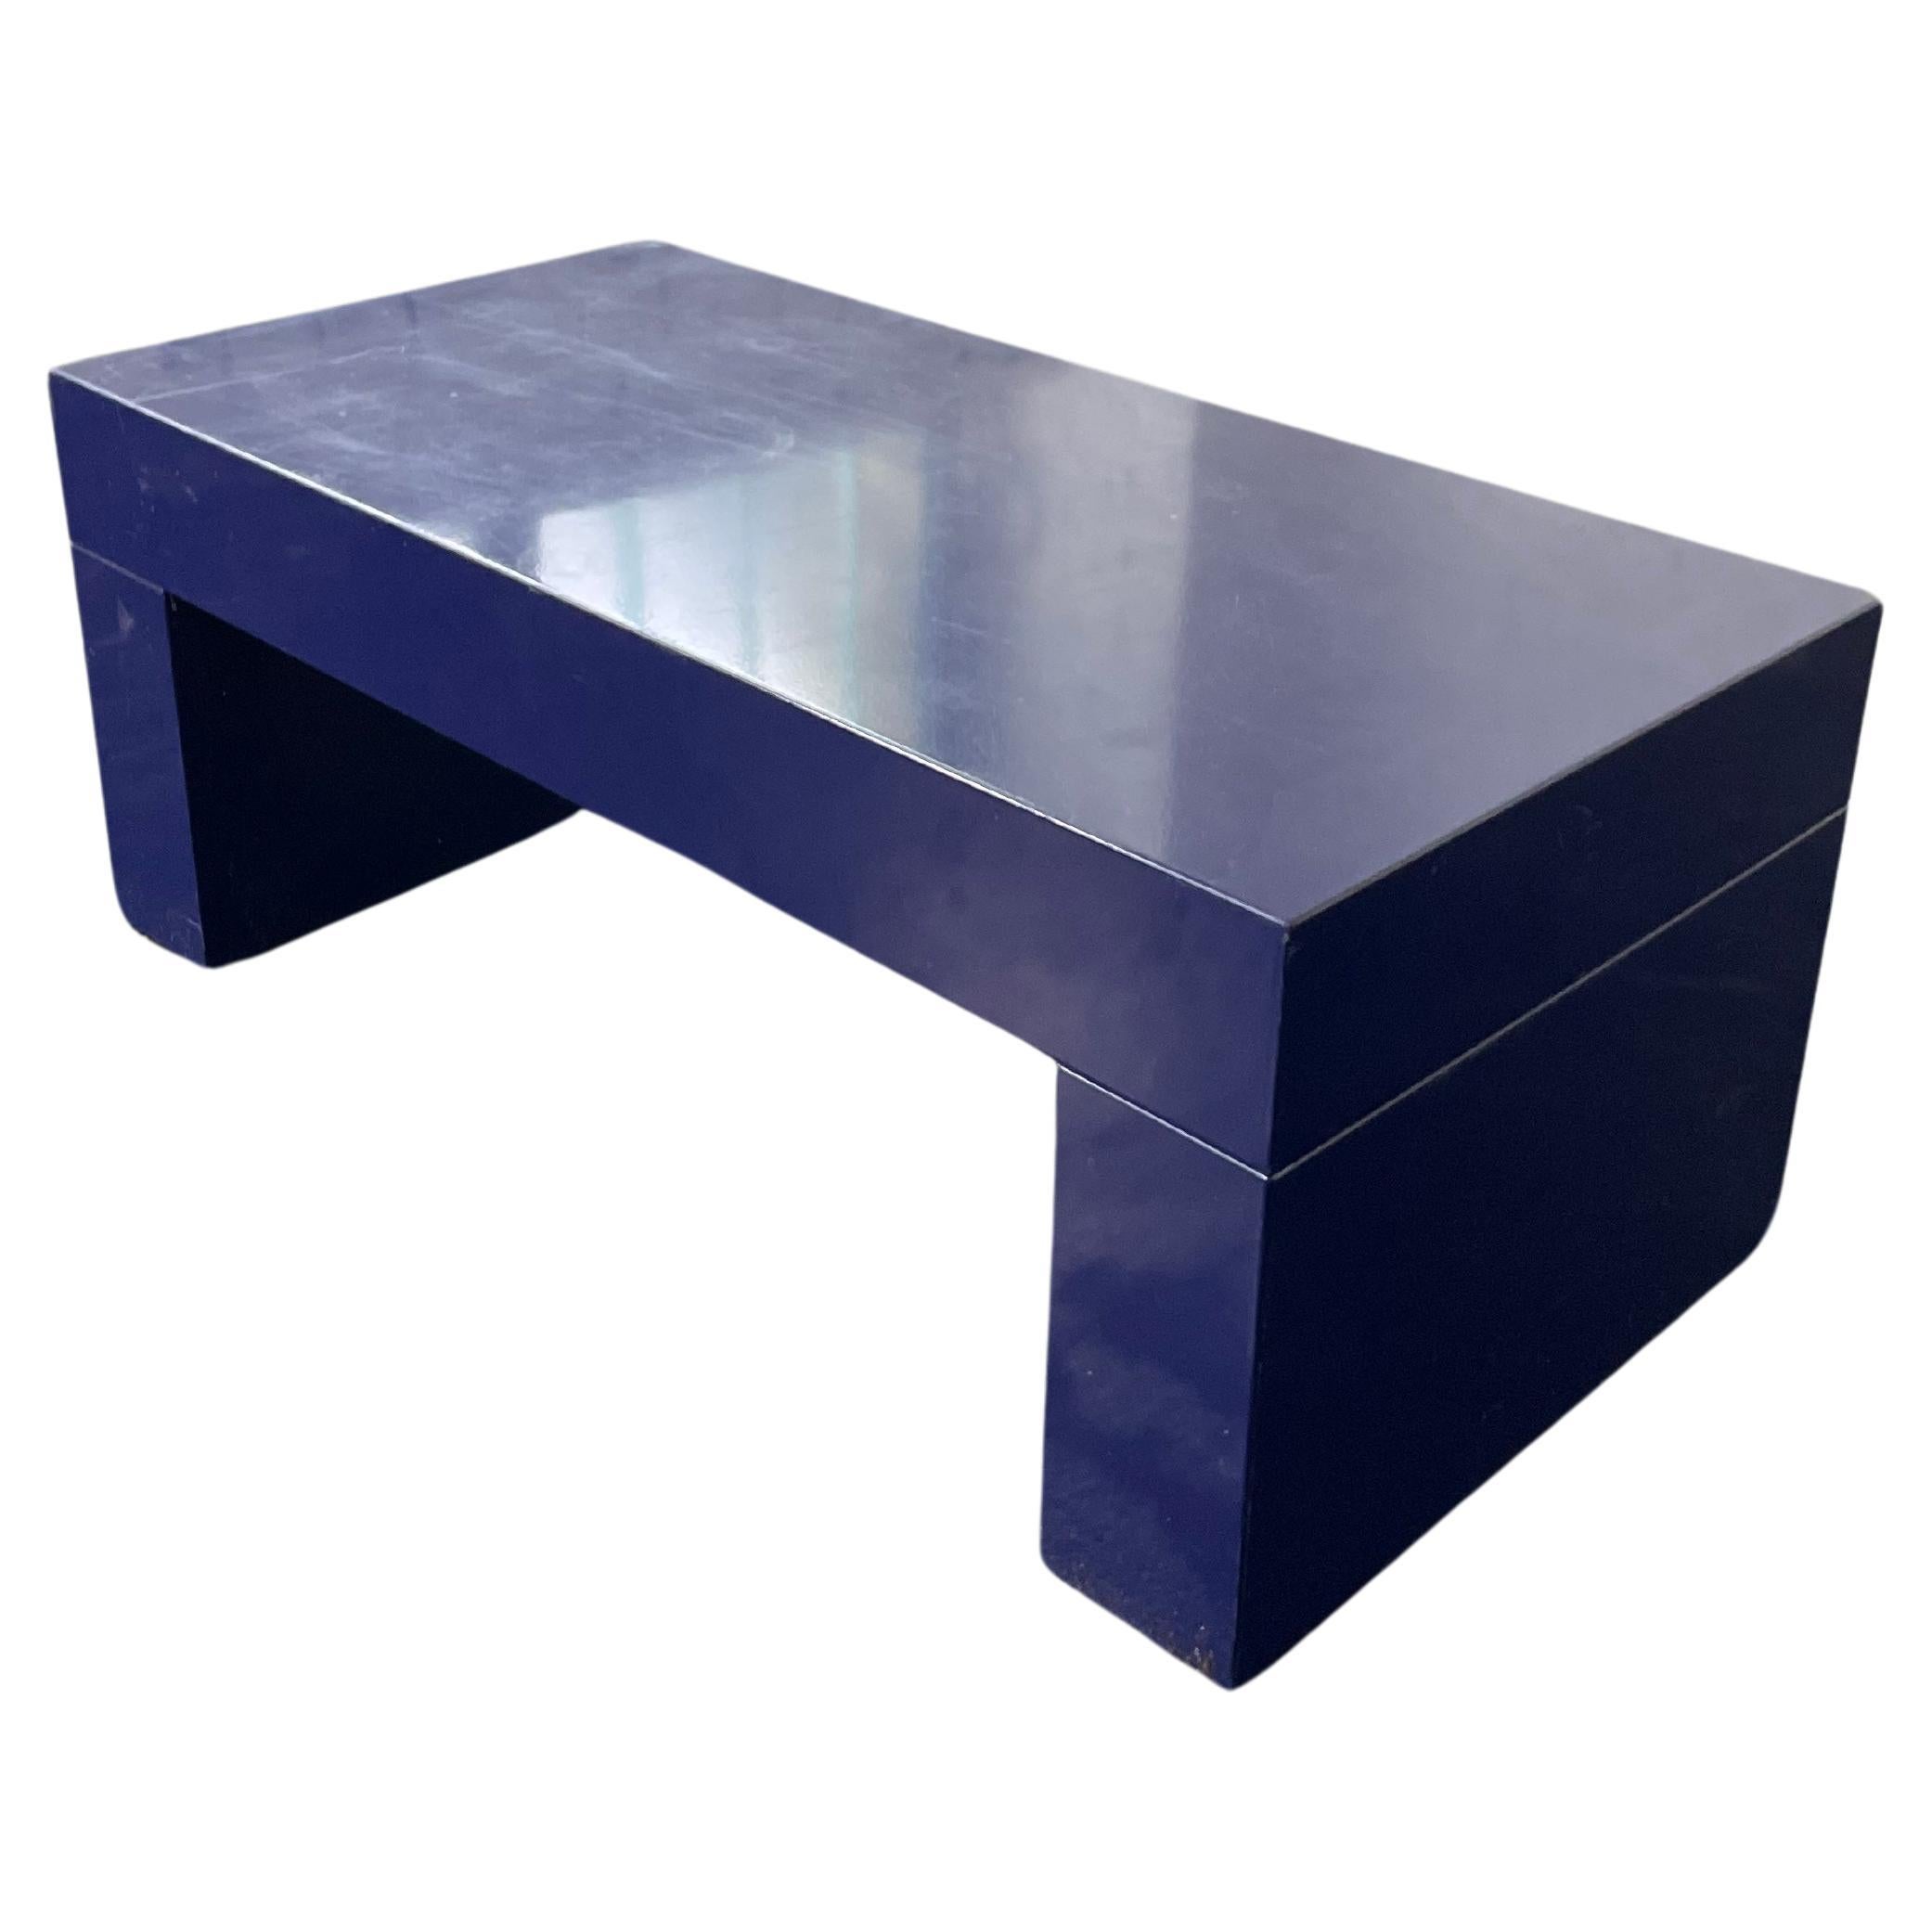 Table/ Blue bench in the style of Massimo Vignelli for Heller circa 2010